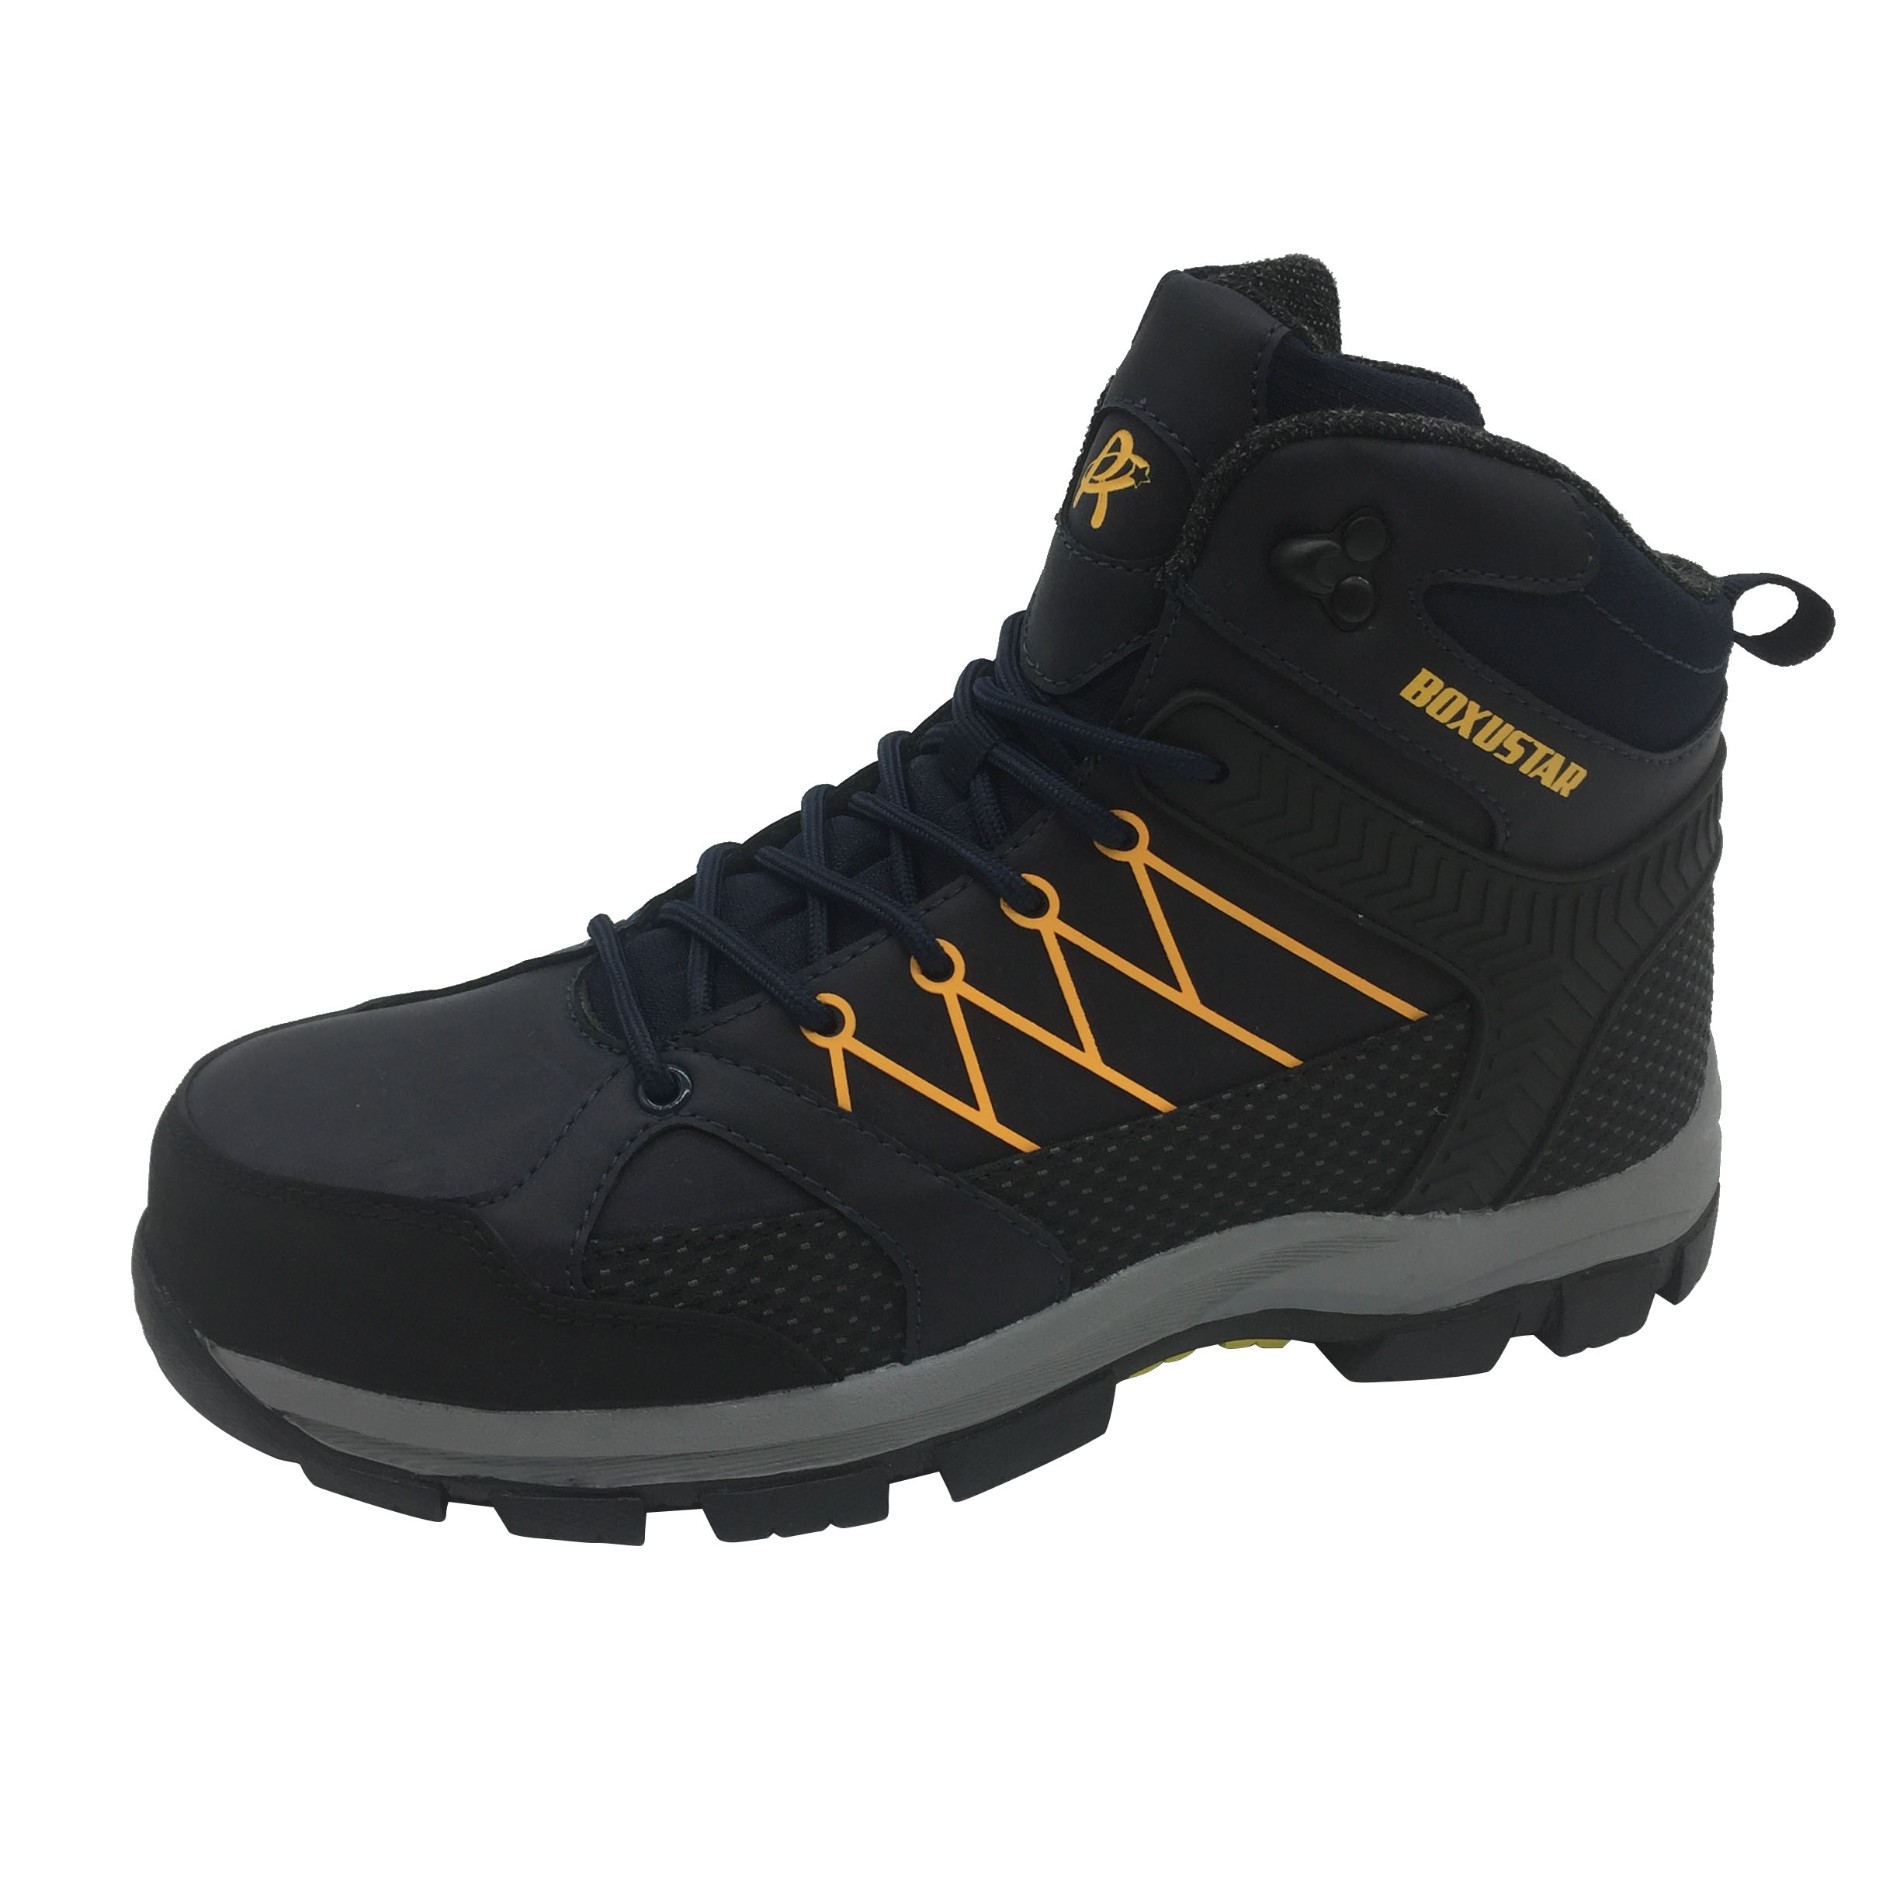 Fashionable and durable steel toe boots high quality men's work boots safety shoes